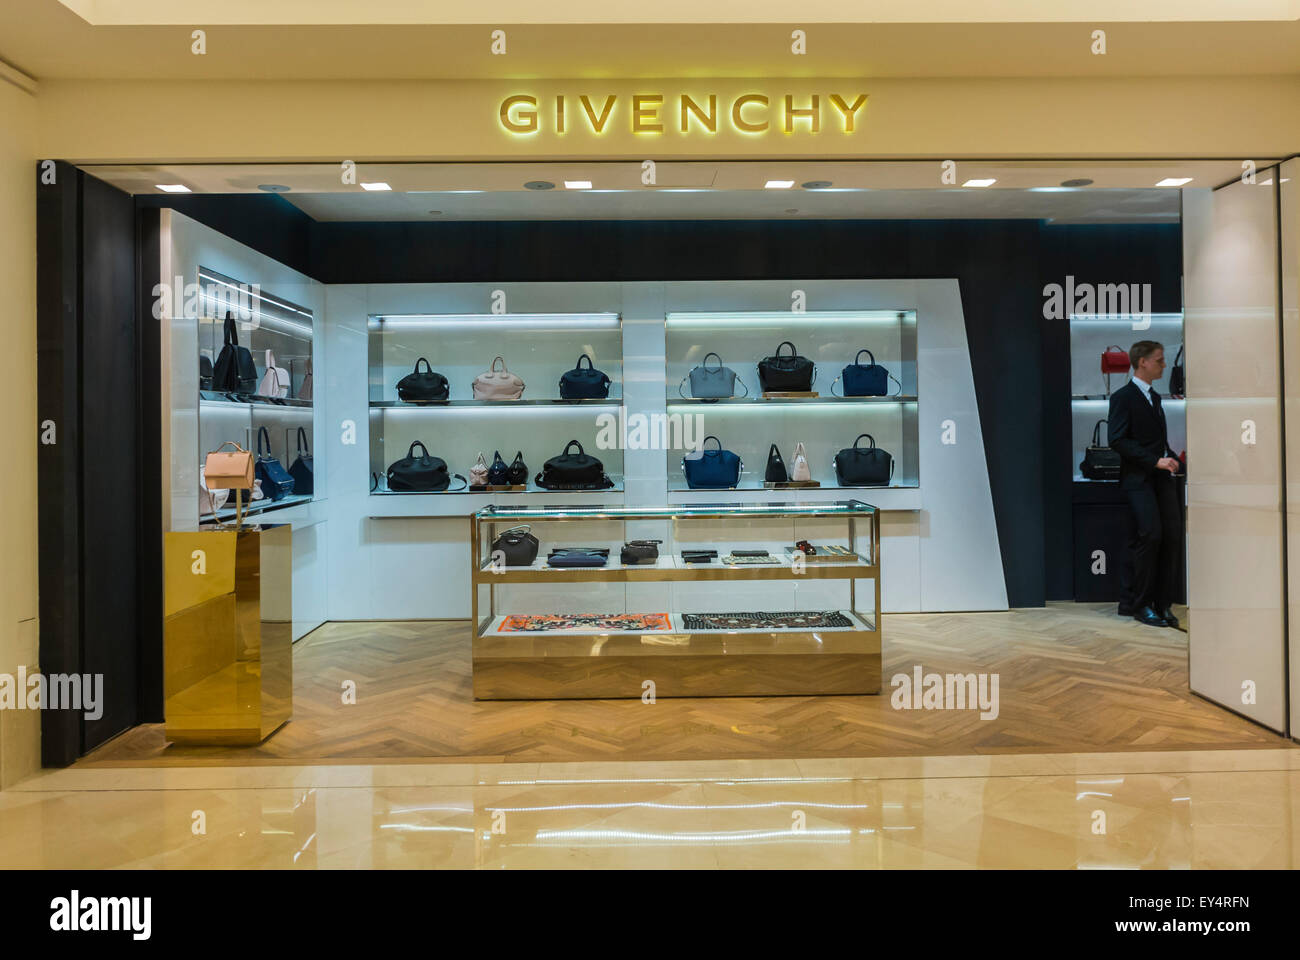 New Givenchy Store on Avenue Montaigne and Release of Limited HDG